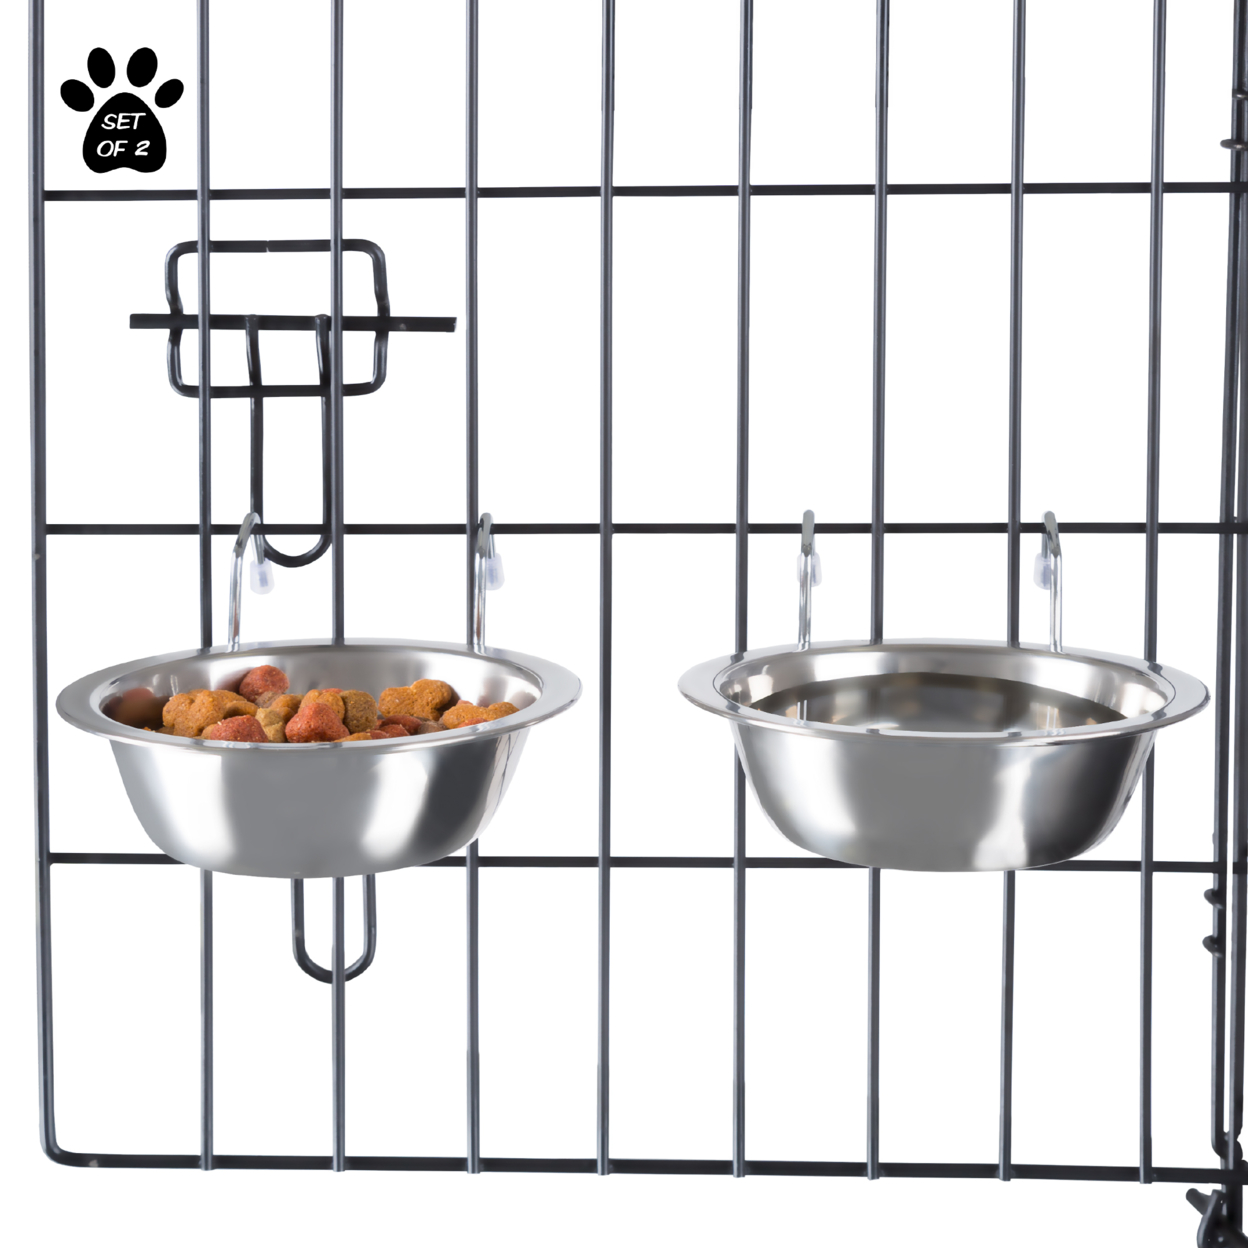 2 Stainless Steel Hanging Pet Bowls For Dogs And Cats- Cage, Kennel, And Crate Feeder Dish For Food And Water 8 OZ